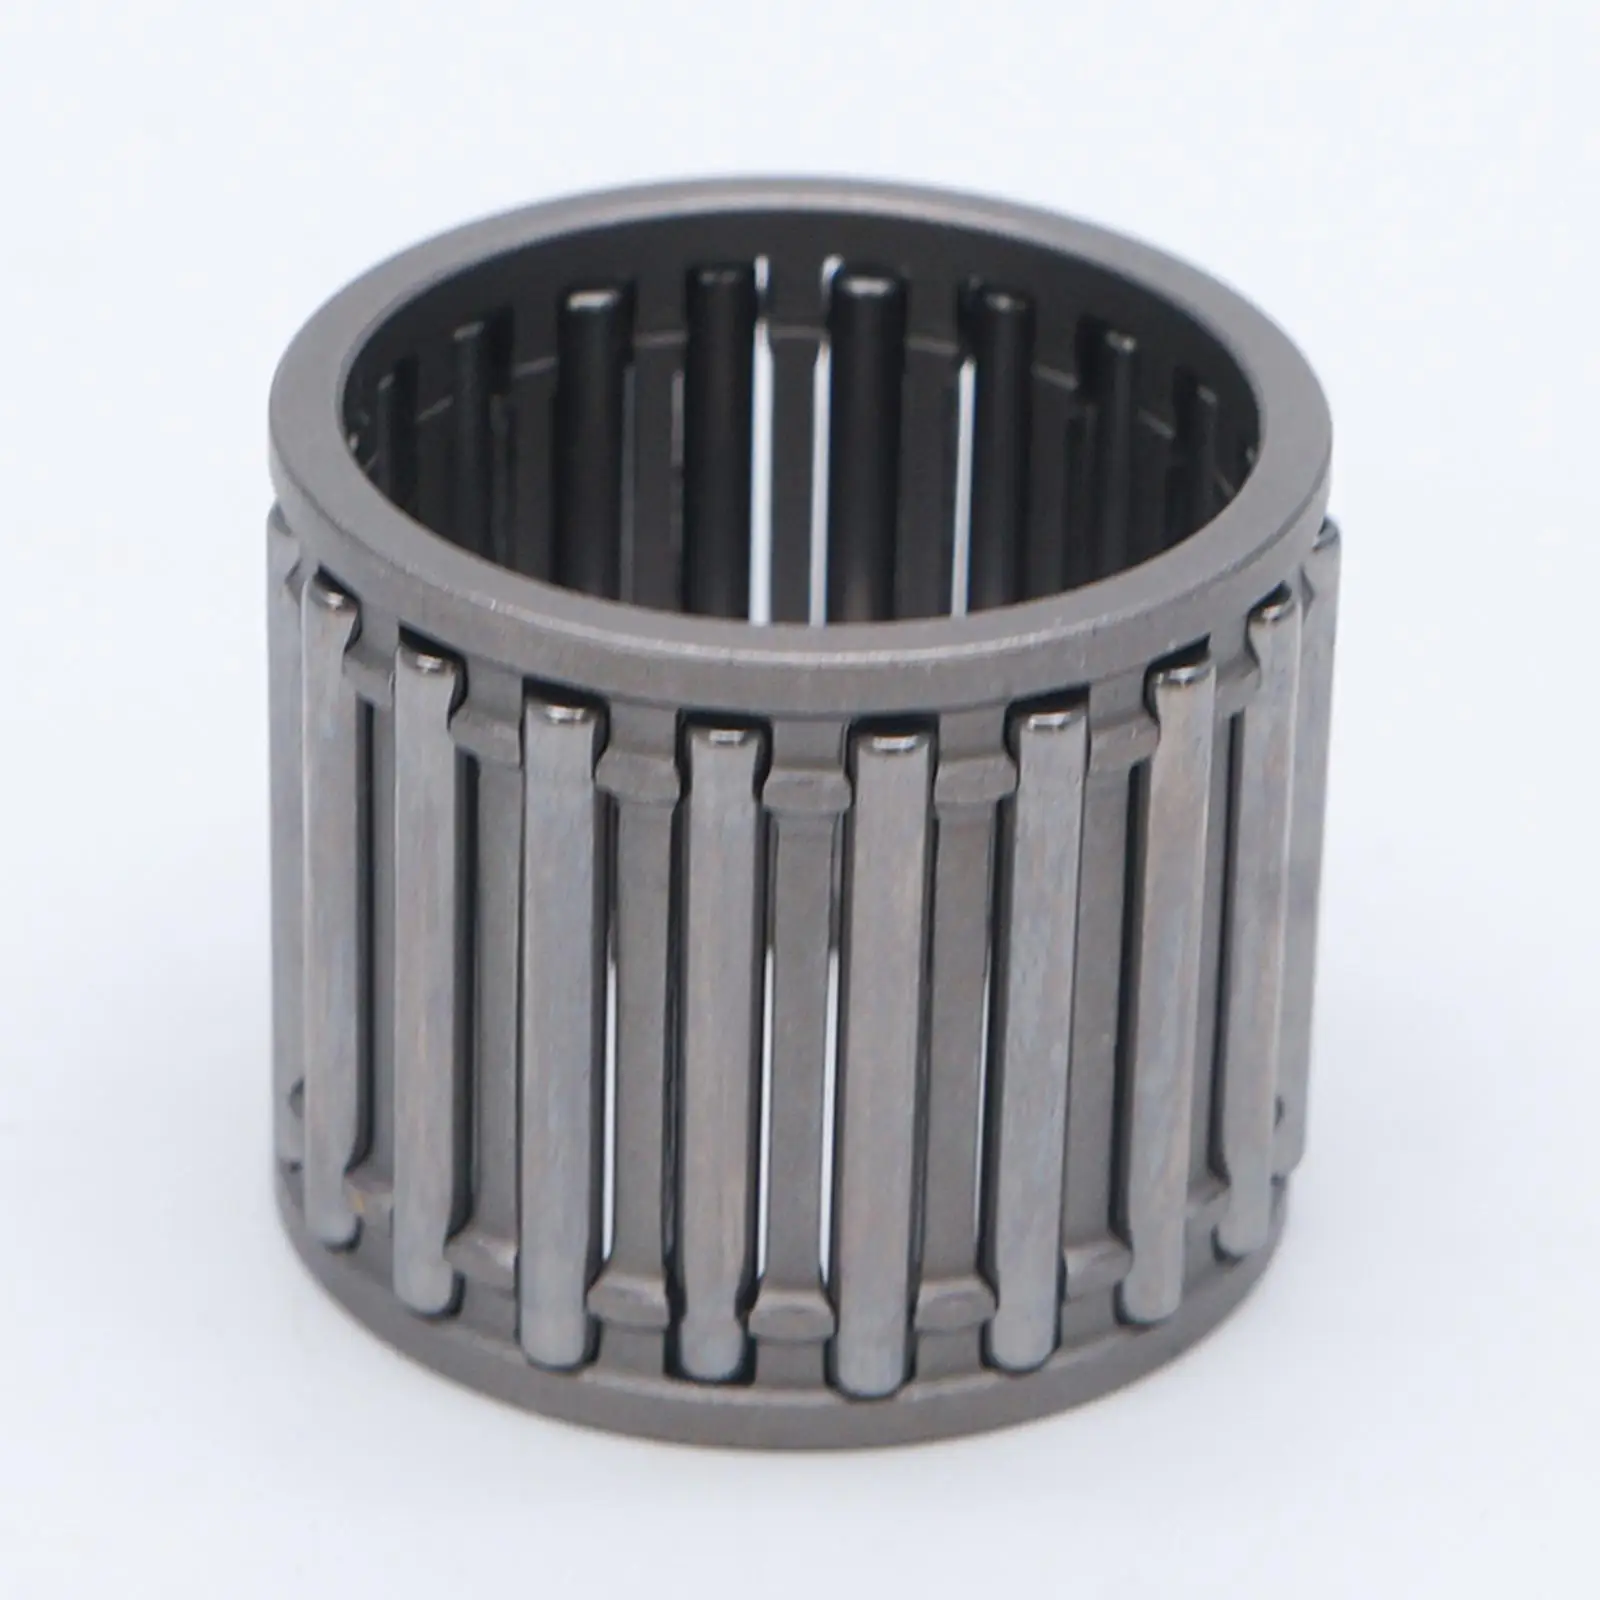 High 3310-326V4 Replaces 26mm Needle Bearing New Wrist Pin Bearing Fit for  Outboard Motor 22550HP 93310-326V4-00